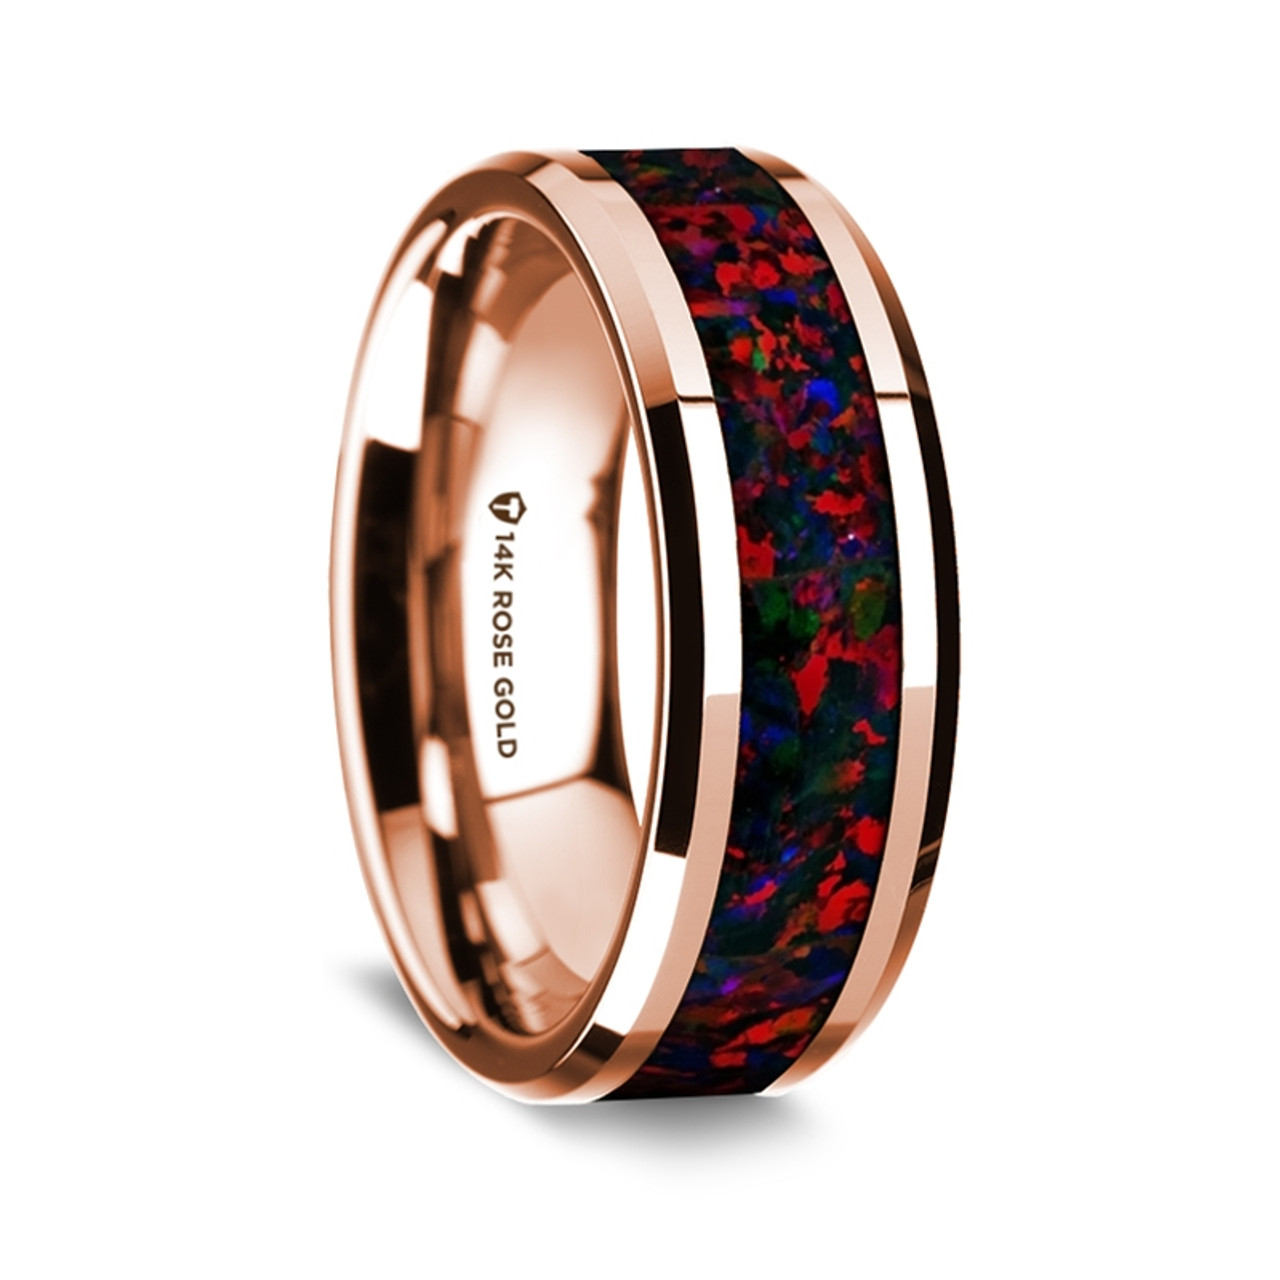 14K Rose Gold Polished Beveled Edges Wedding Ring with Black and Red Opal Inlay - 8 mm ~ (G65-108)